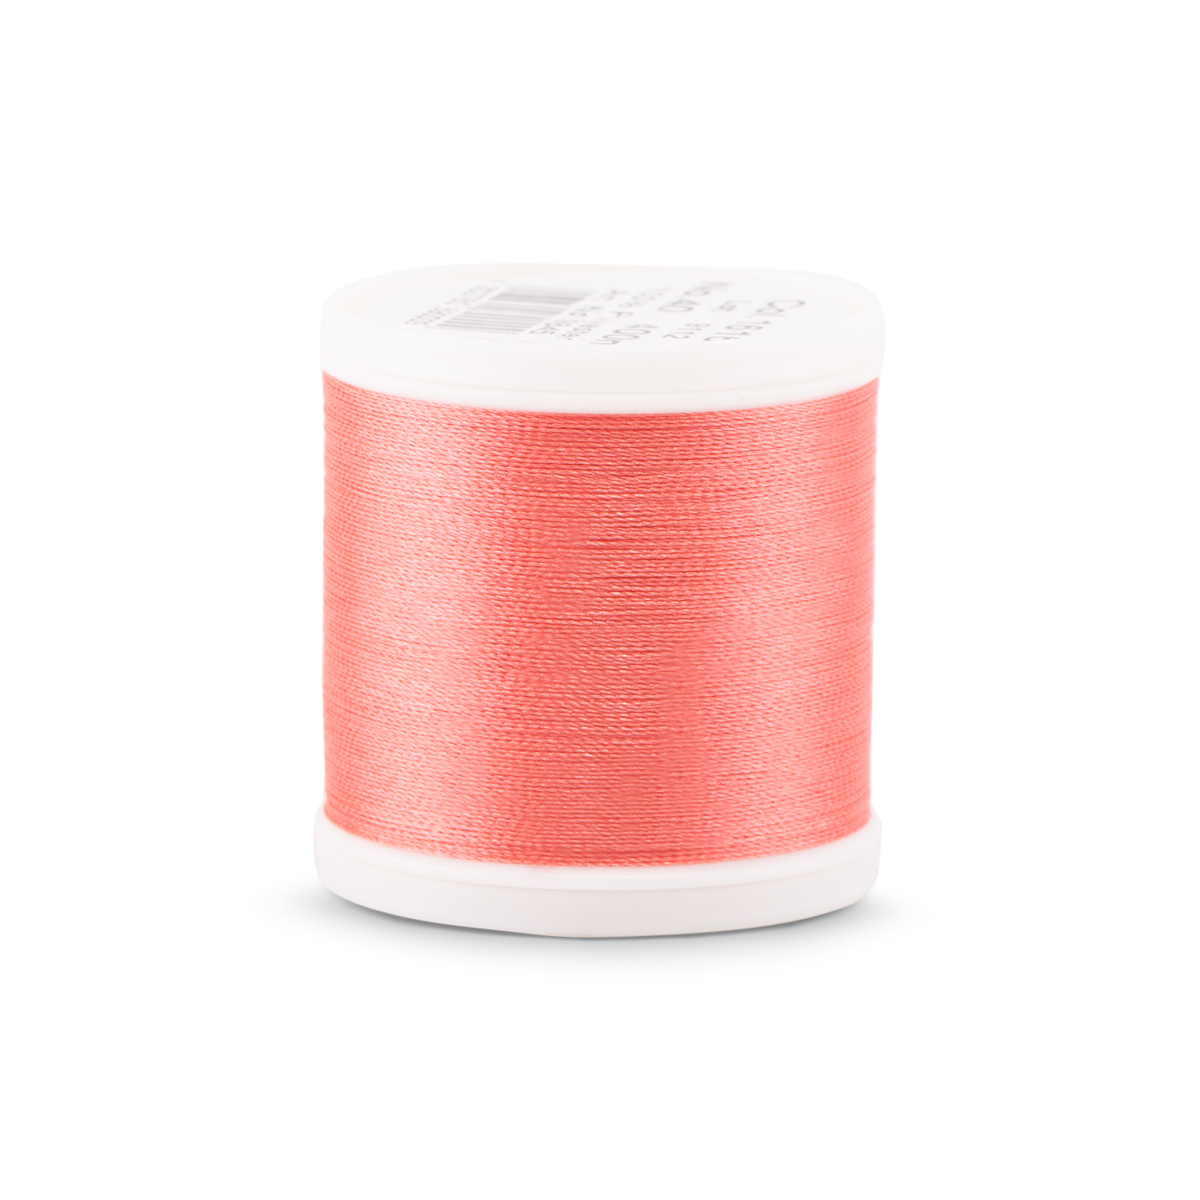 Madeira Polyester Embroidery Thread - Neon Shades, Set of 4